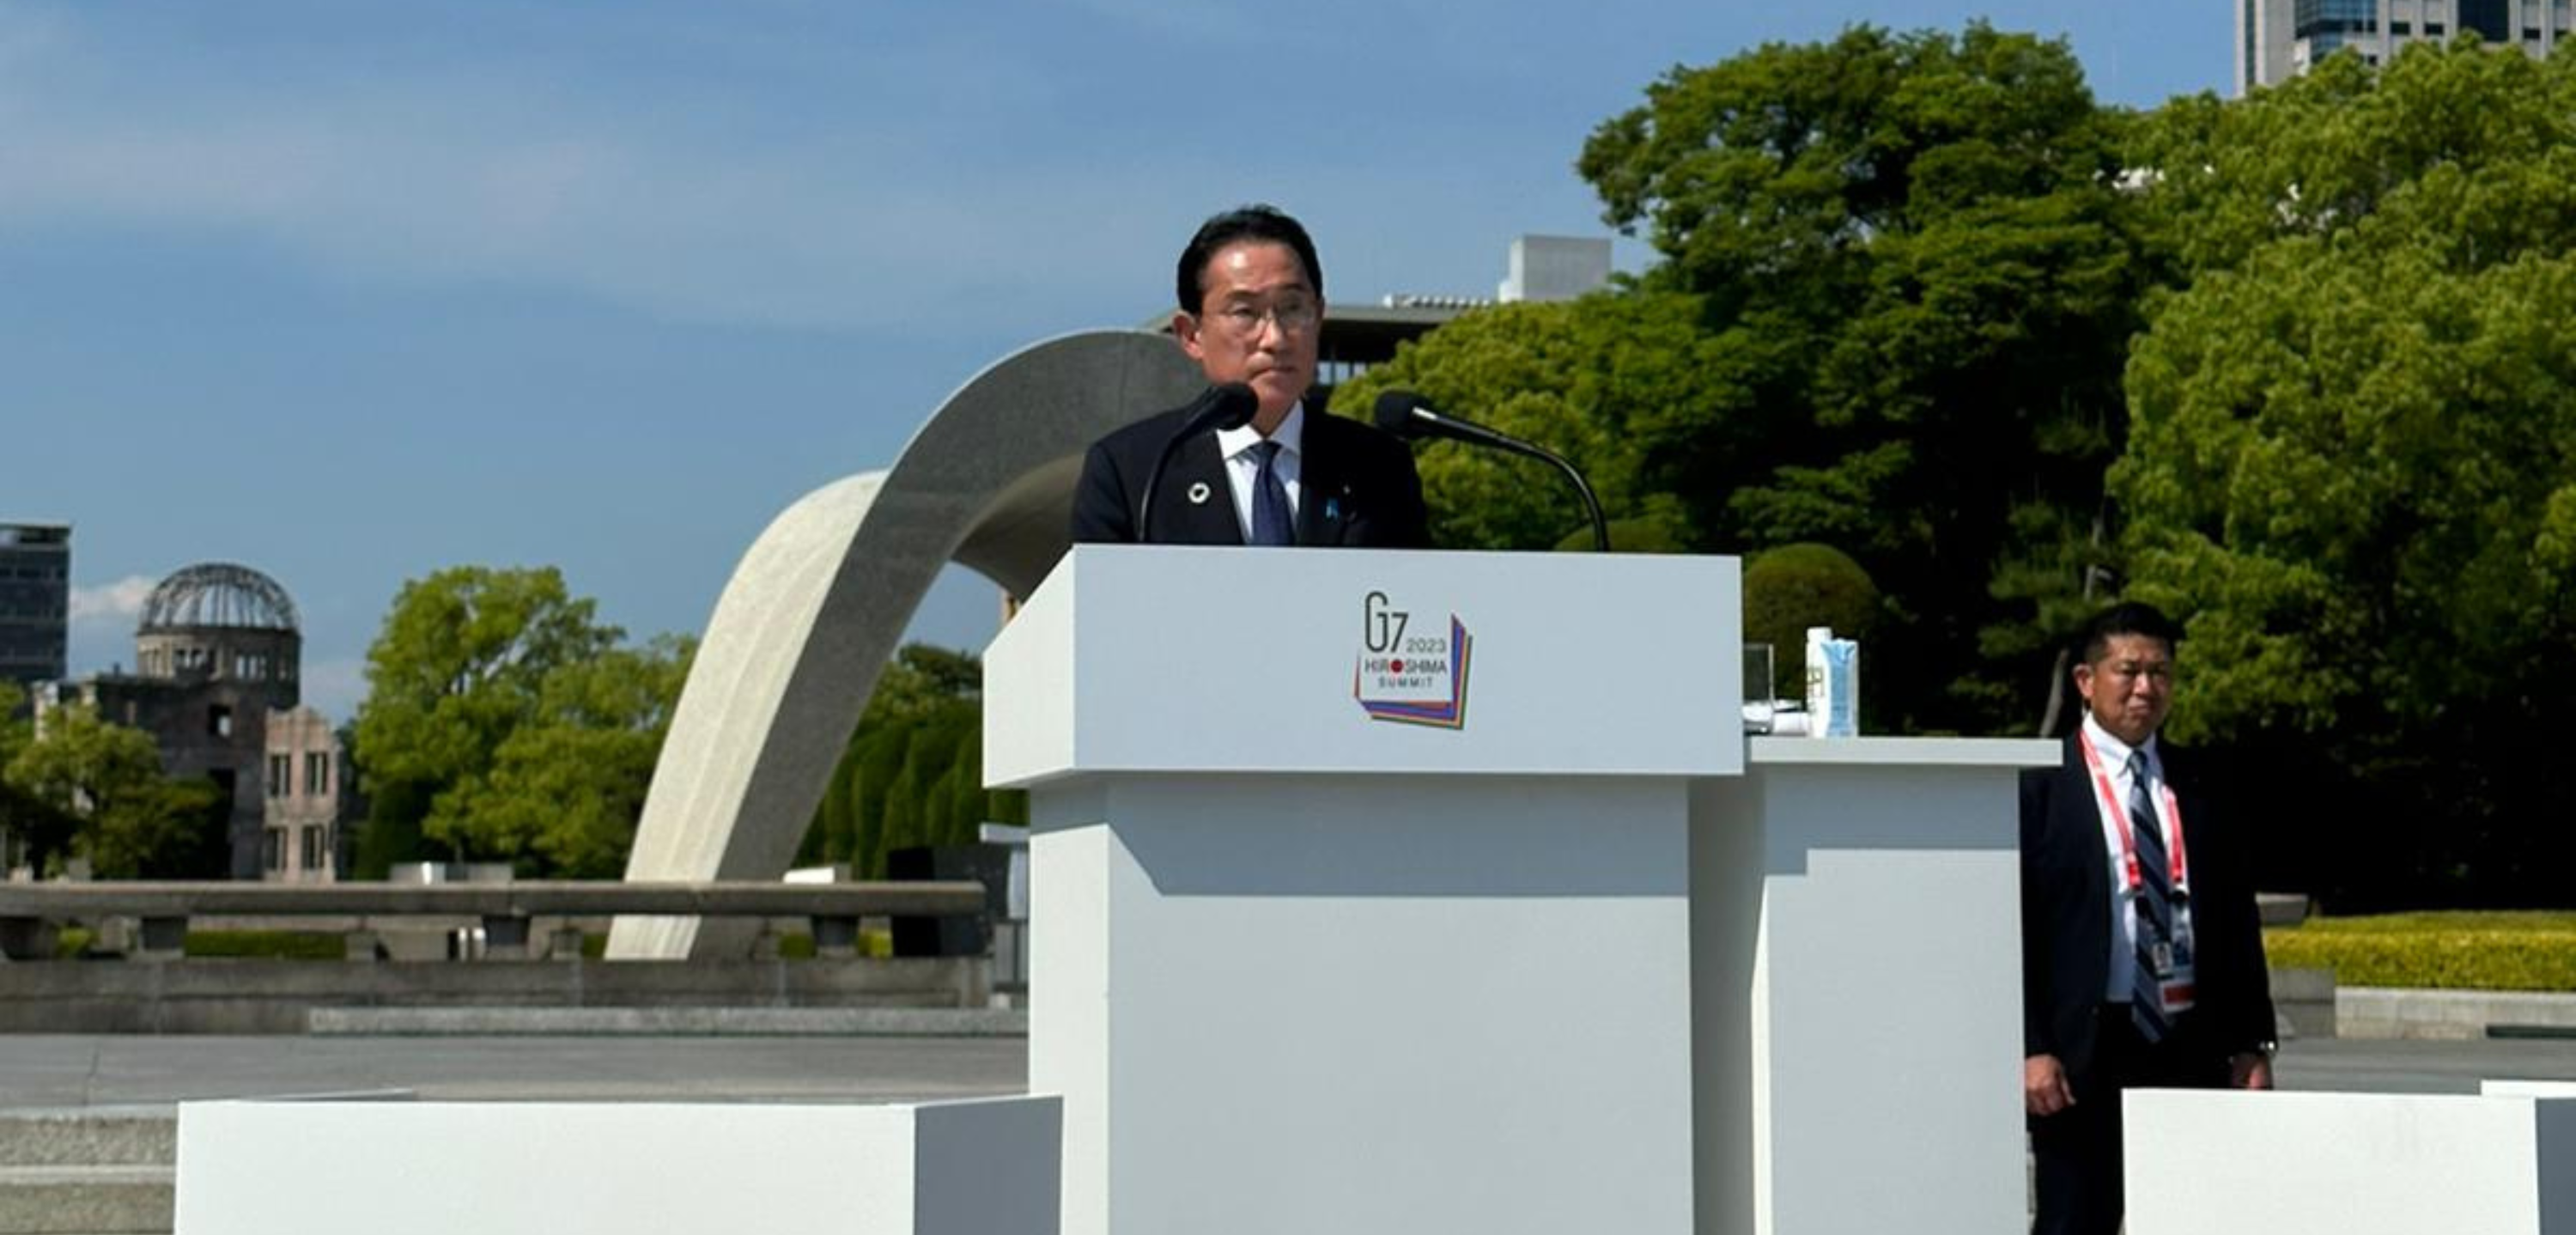 Prime Minister of Japan, Fumio Kishida, stands behind a podium while addressing attendees of the G7 2023 Summit